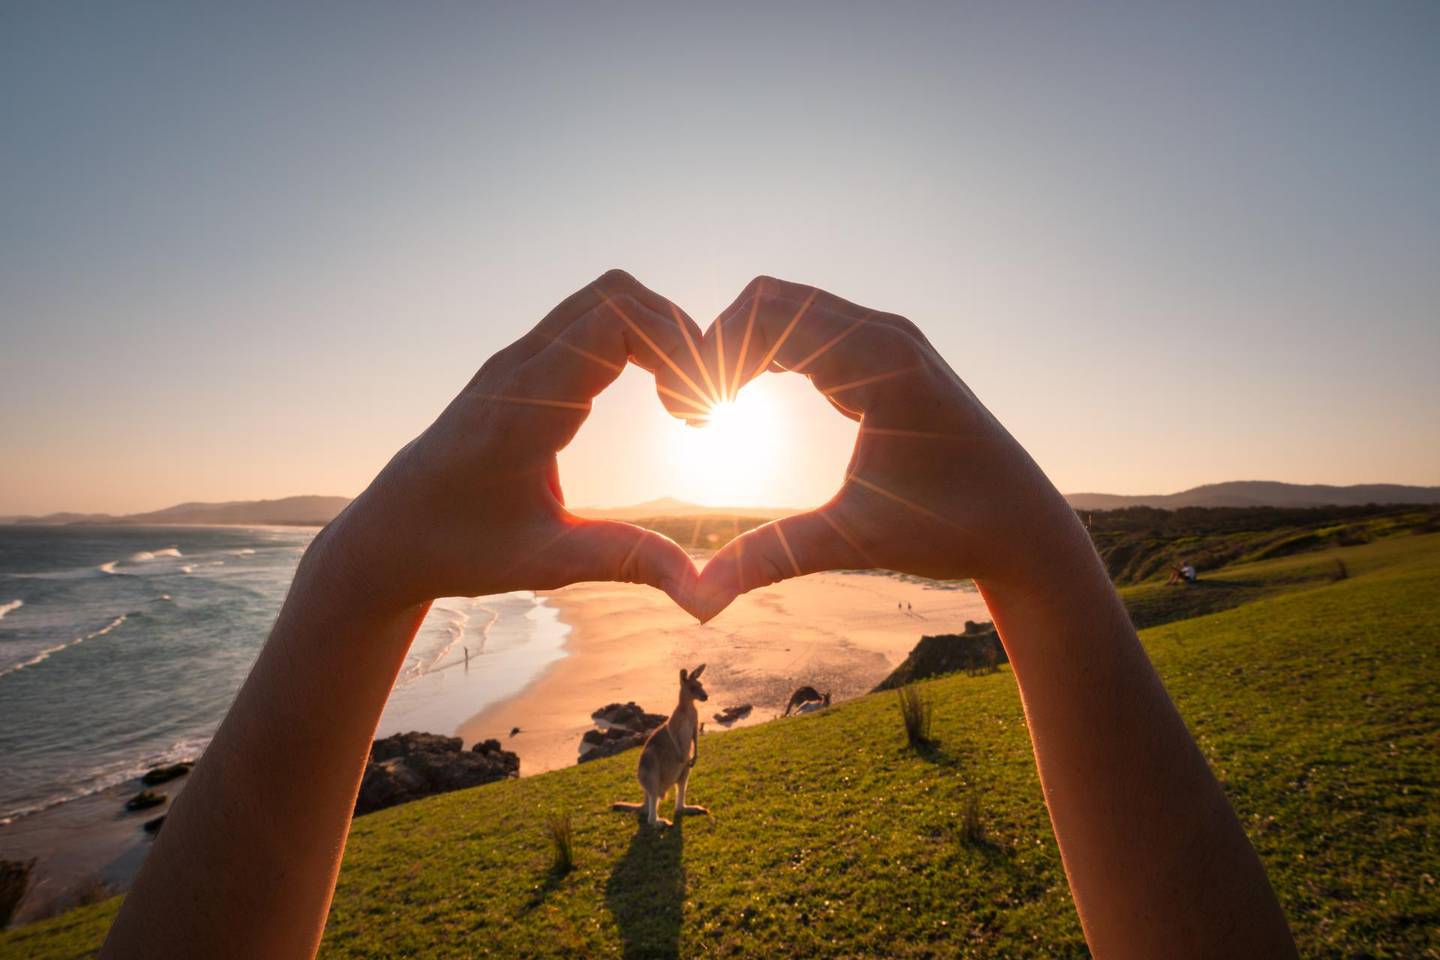 An image from the 'Now’s The Time to Love NSW' campaign. Courtesy: Destination NSW